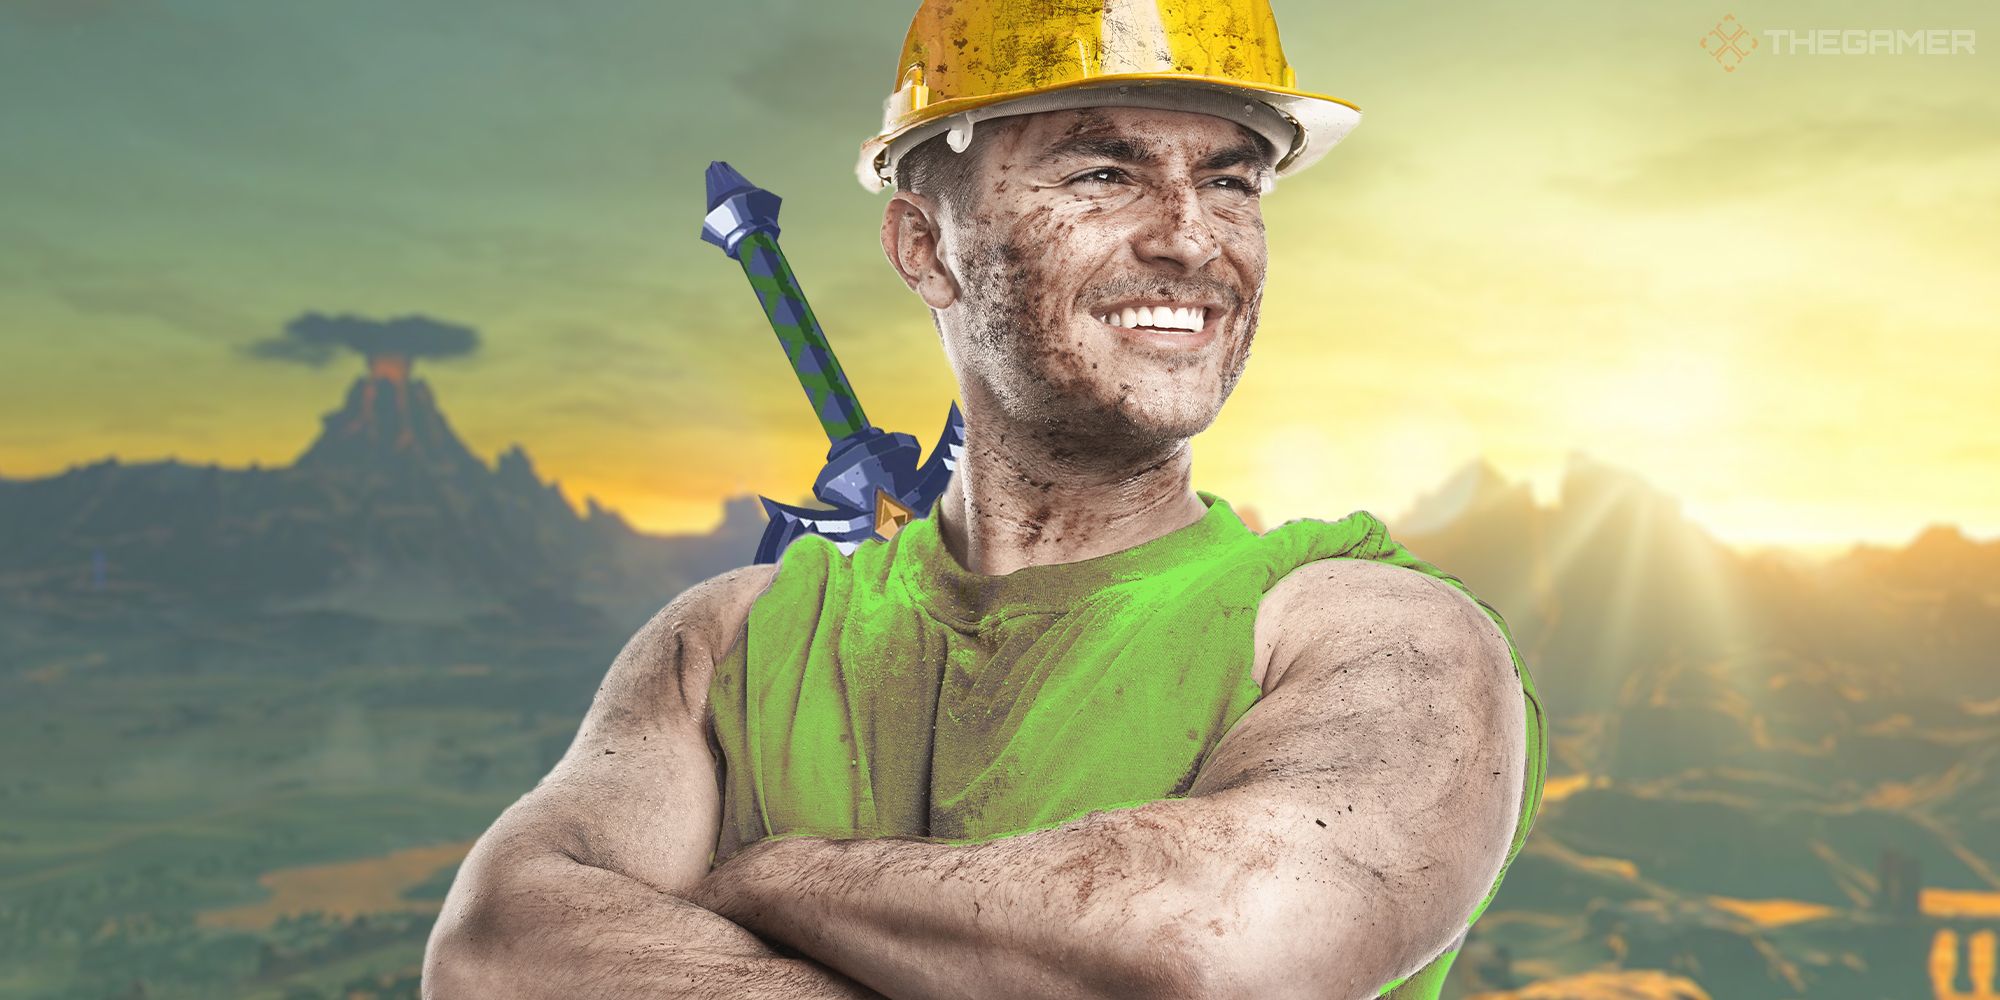 A guy wearing a green cut-off t-shirt and a hard hat has his arms folded. He's smiling and his face is covered in dirt. Behind him is the world of The Legend of Zelda: Breath of the Wild and he has the Master Sword strapped to his back.